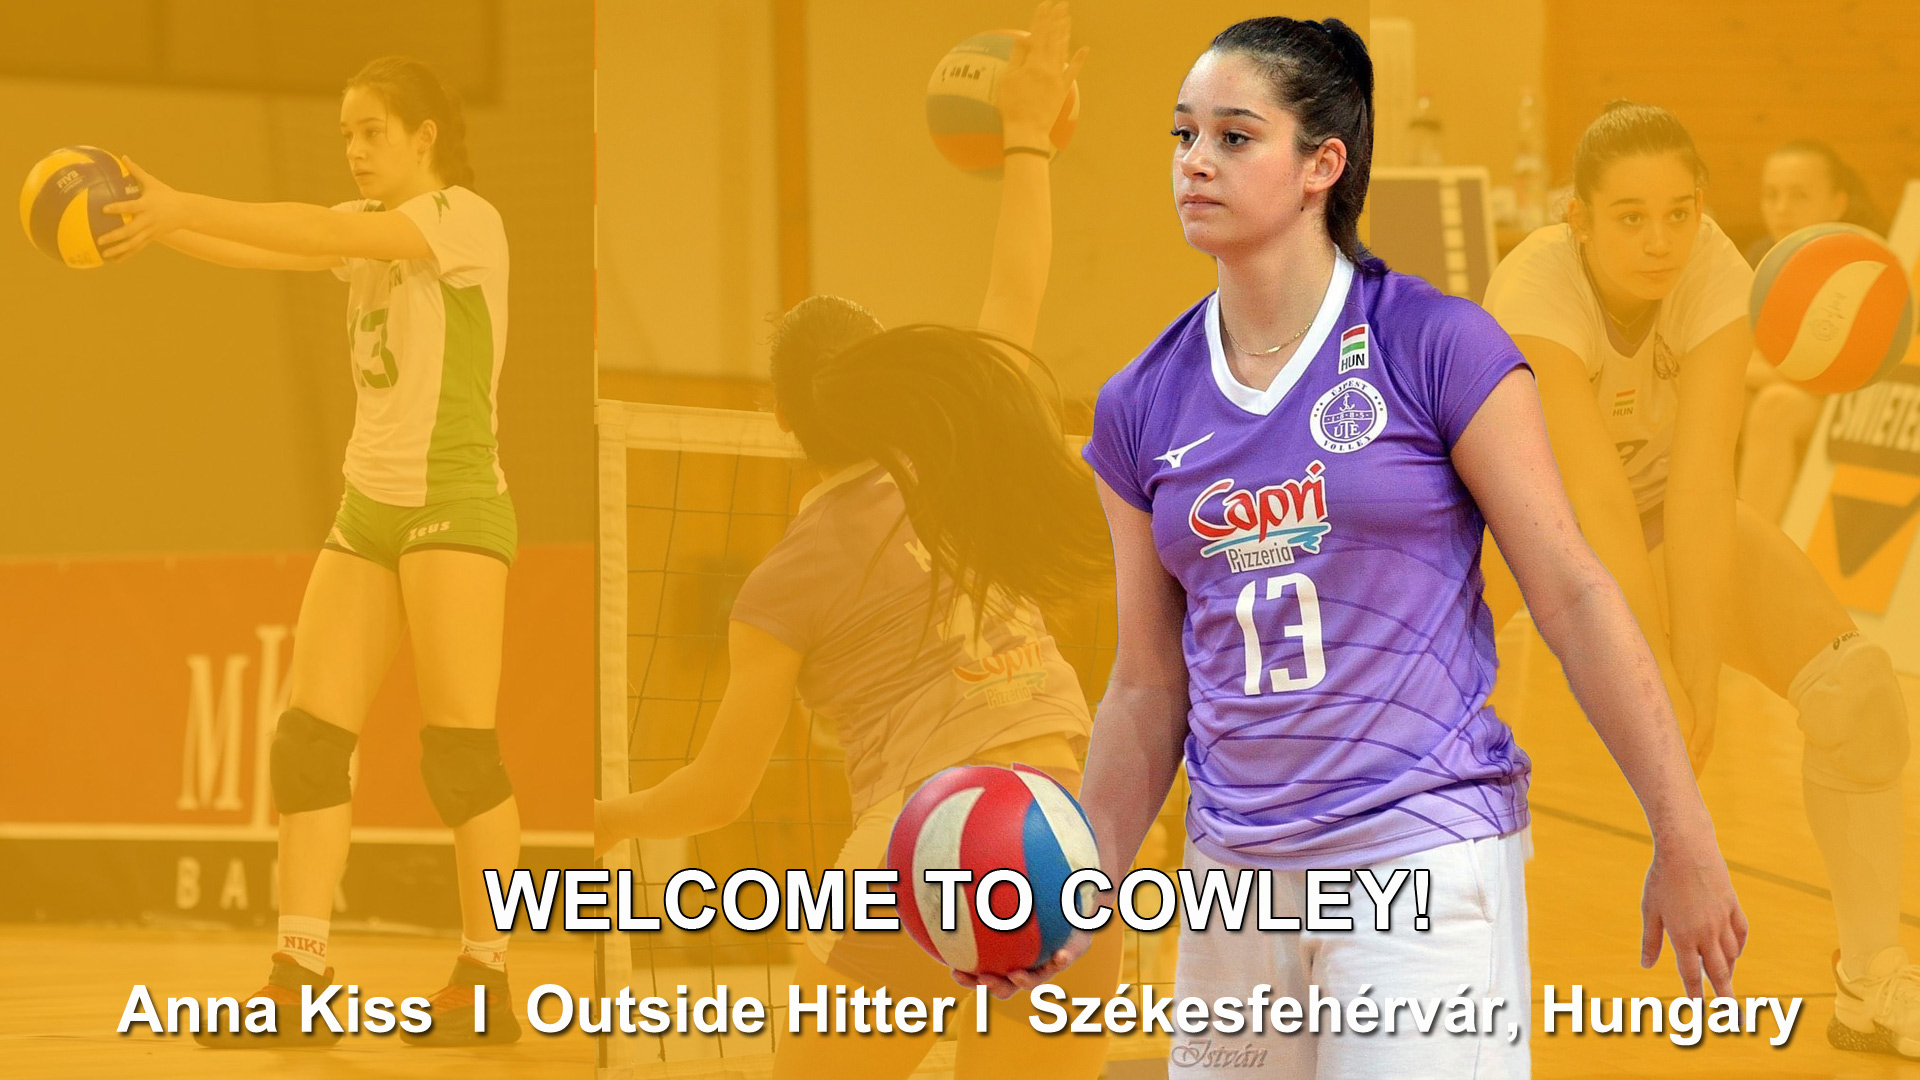 Top-ranked Lady Tigers sign player from Hungary